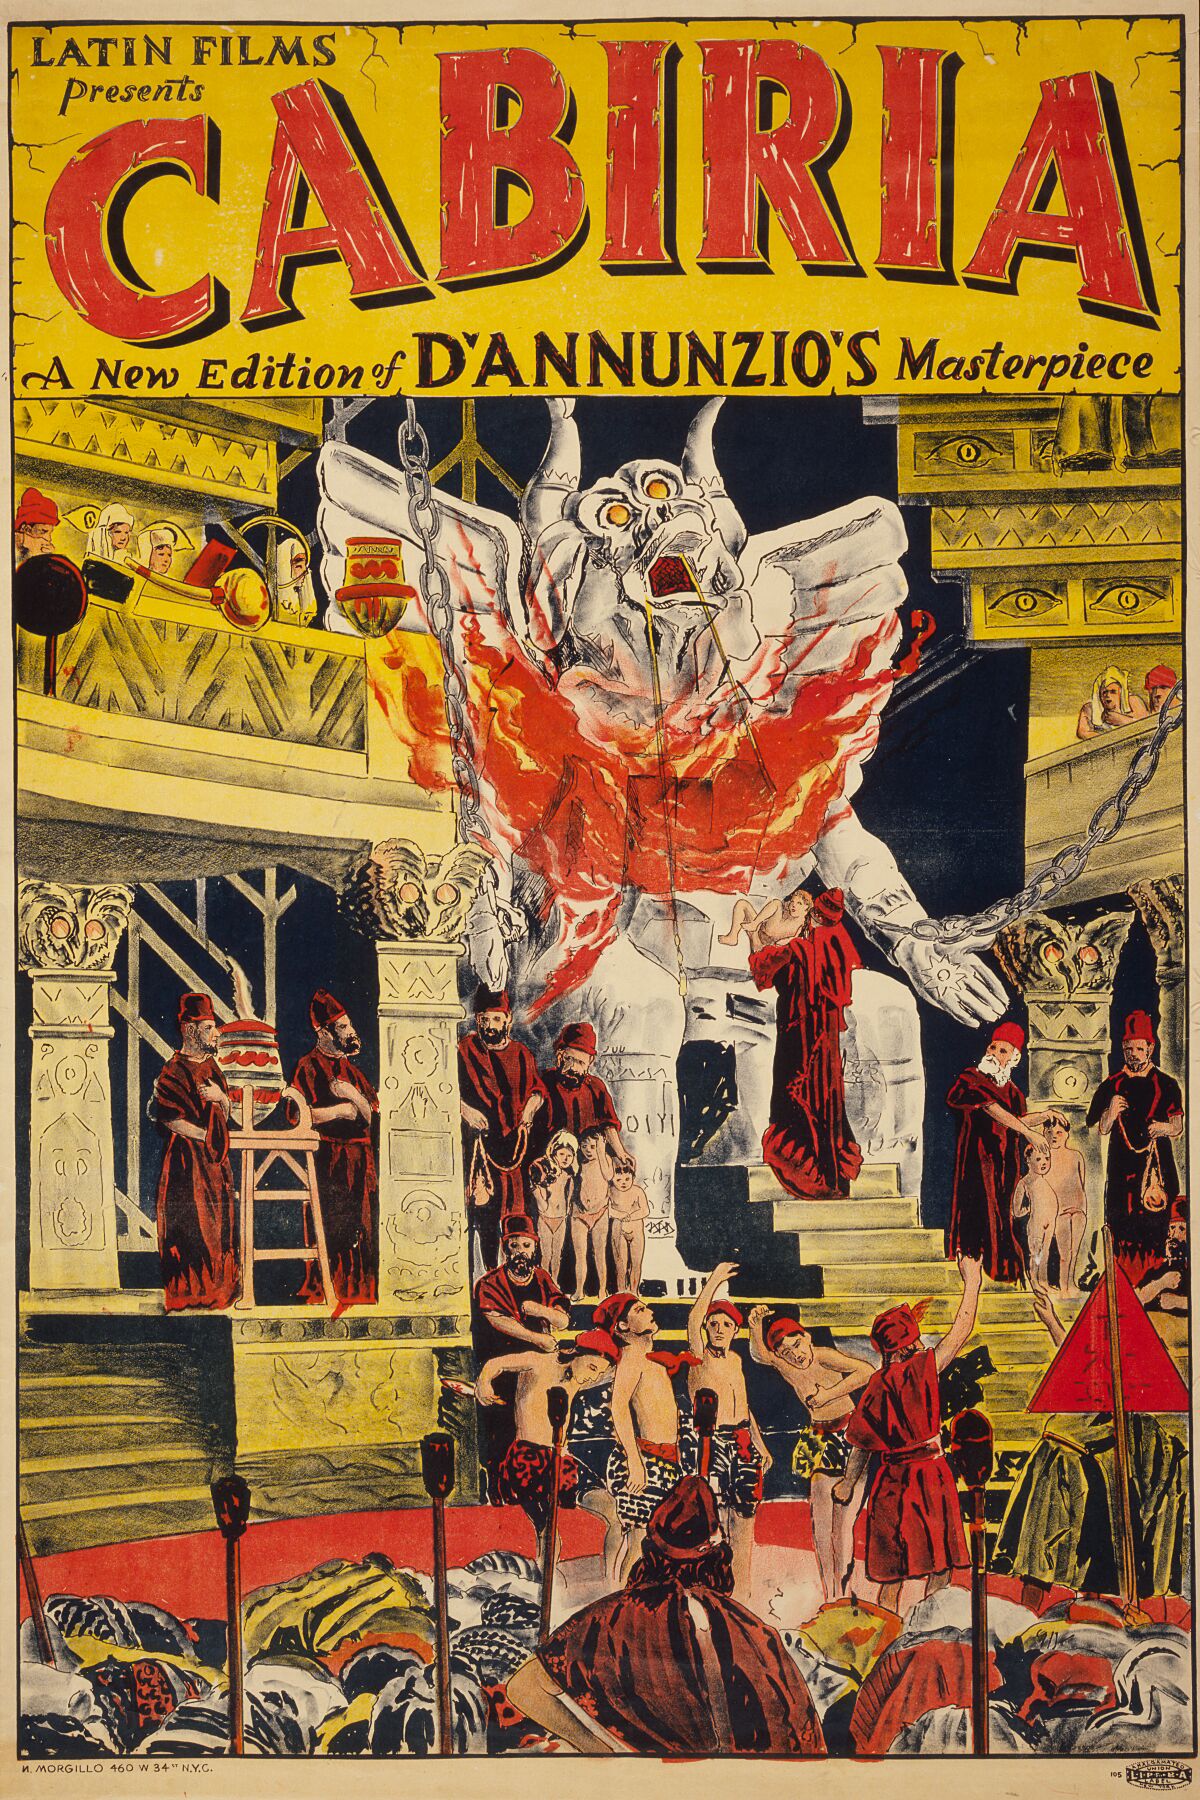 Poster for the movie Cabiria, 1914